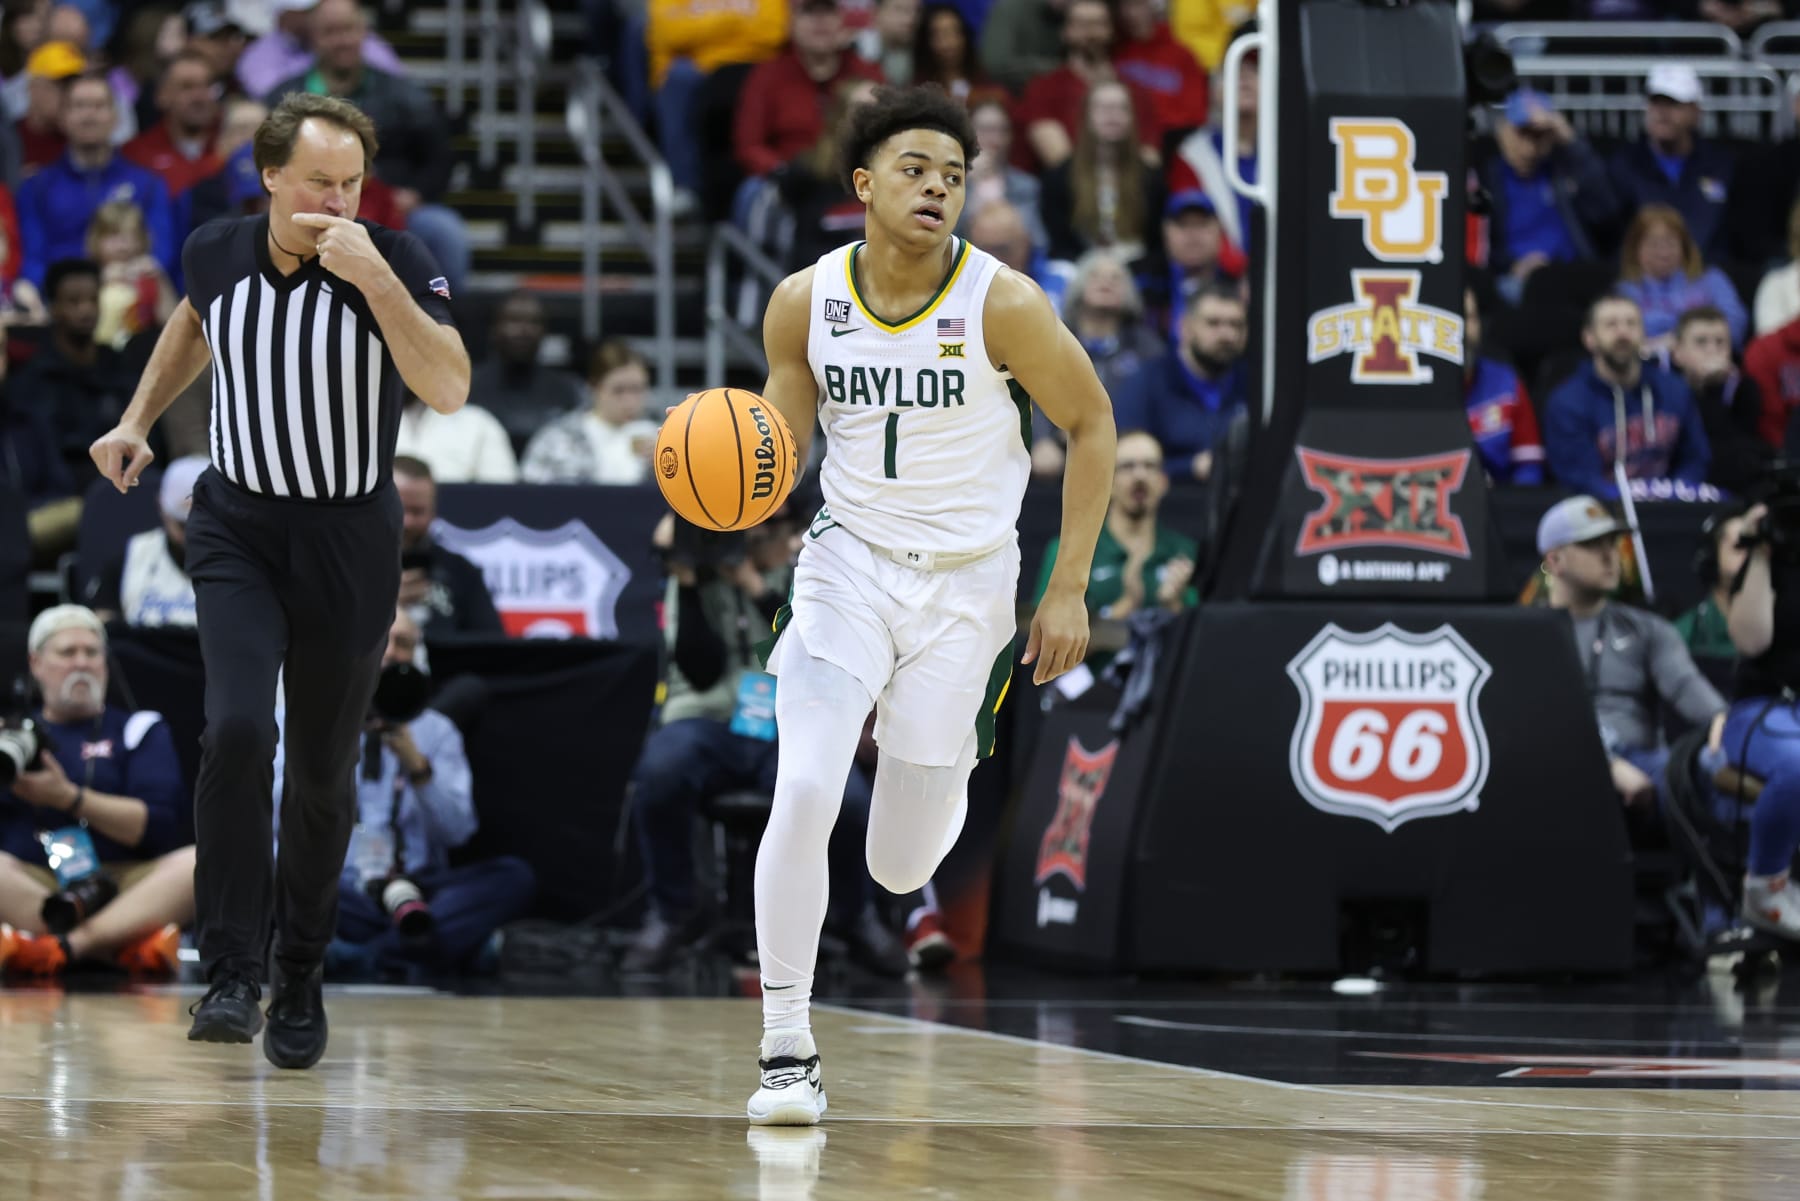 Dyson Daniels scouting report: 2022 NBA Draft prospect's strengths,  weaknesses and NBA player comparison